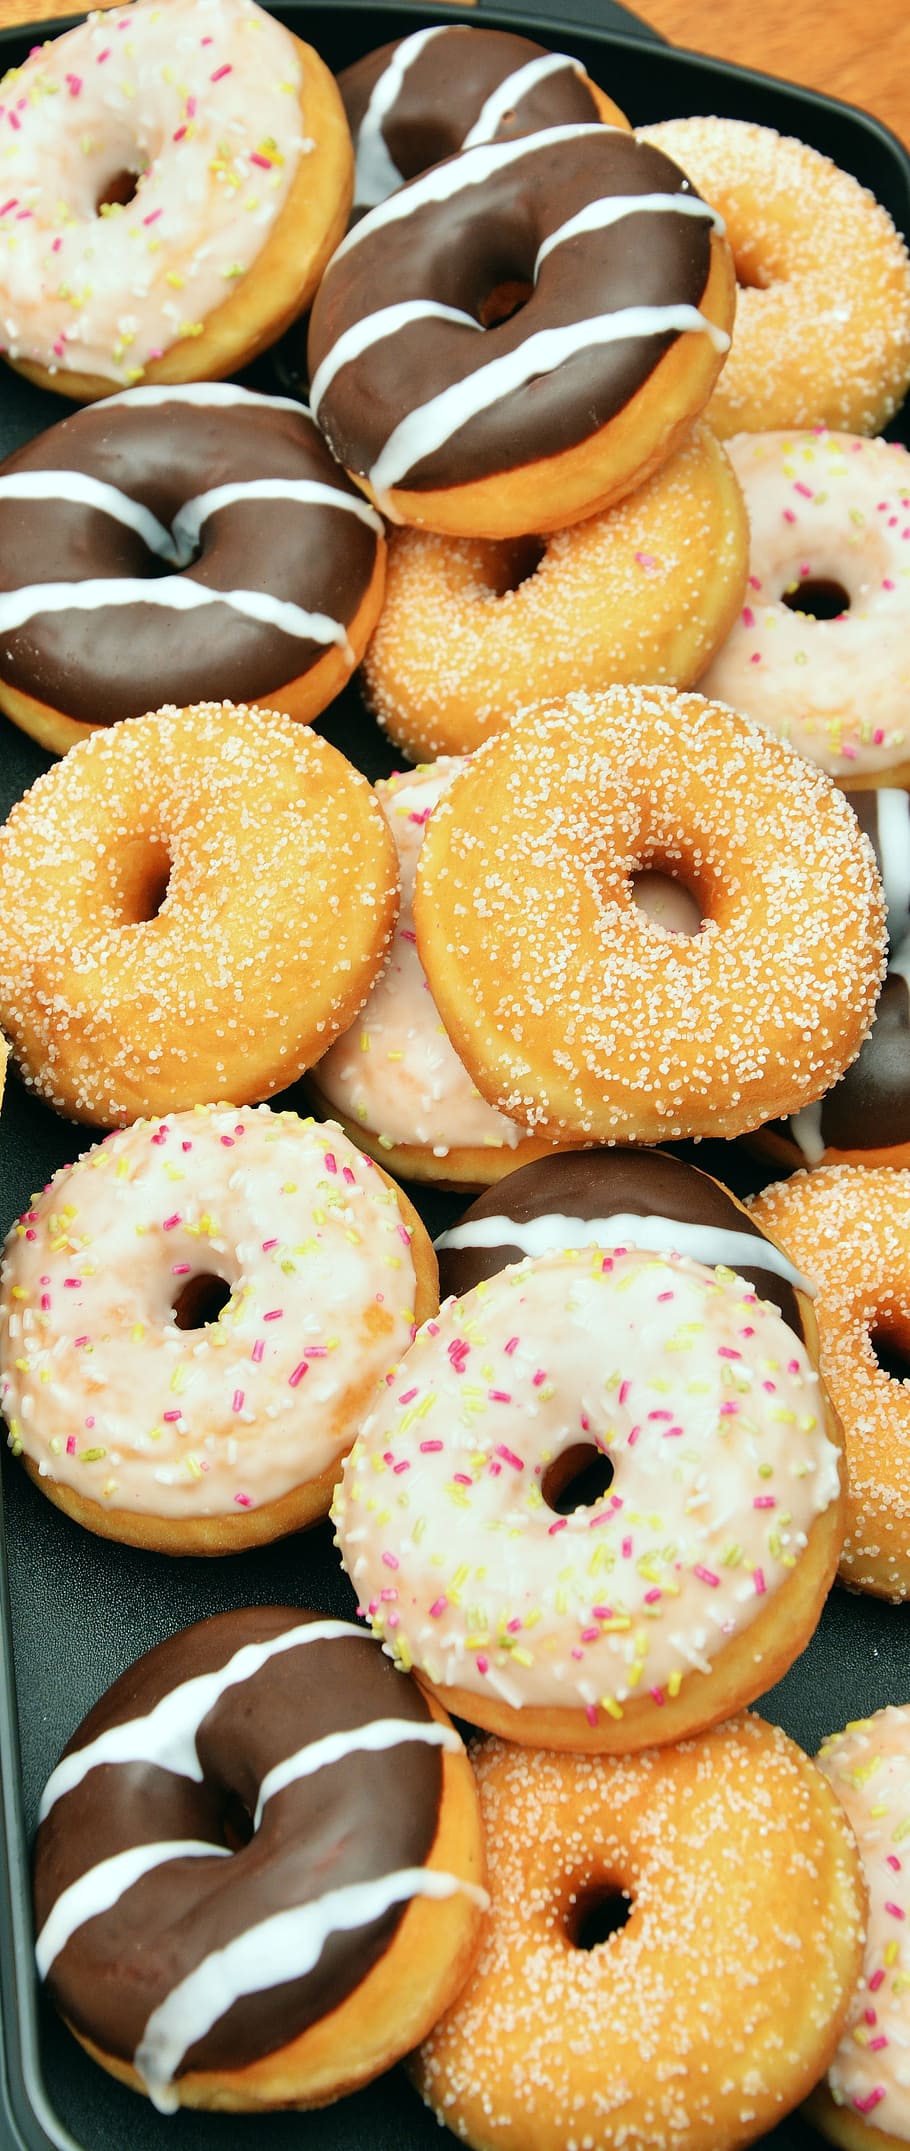 assorted flavors of doughnuts, donuts, pastries, glaze, sweet, HD wallpaper